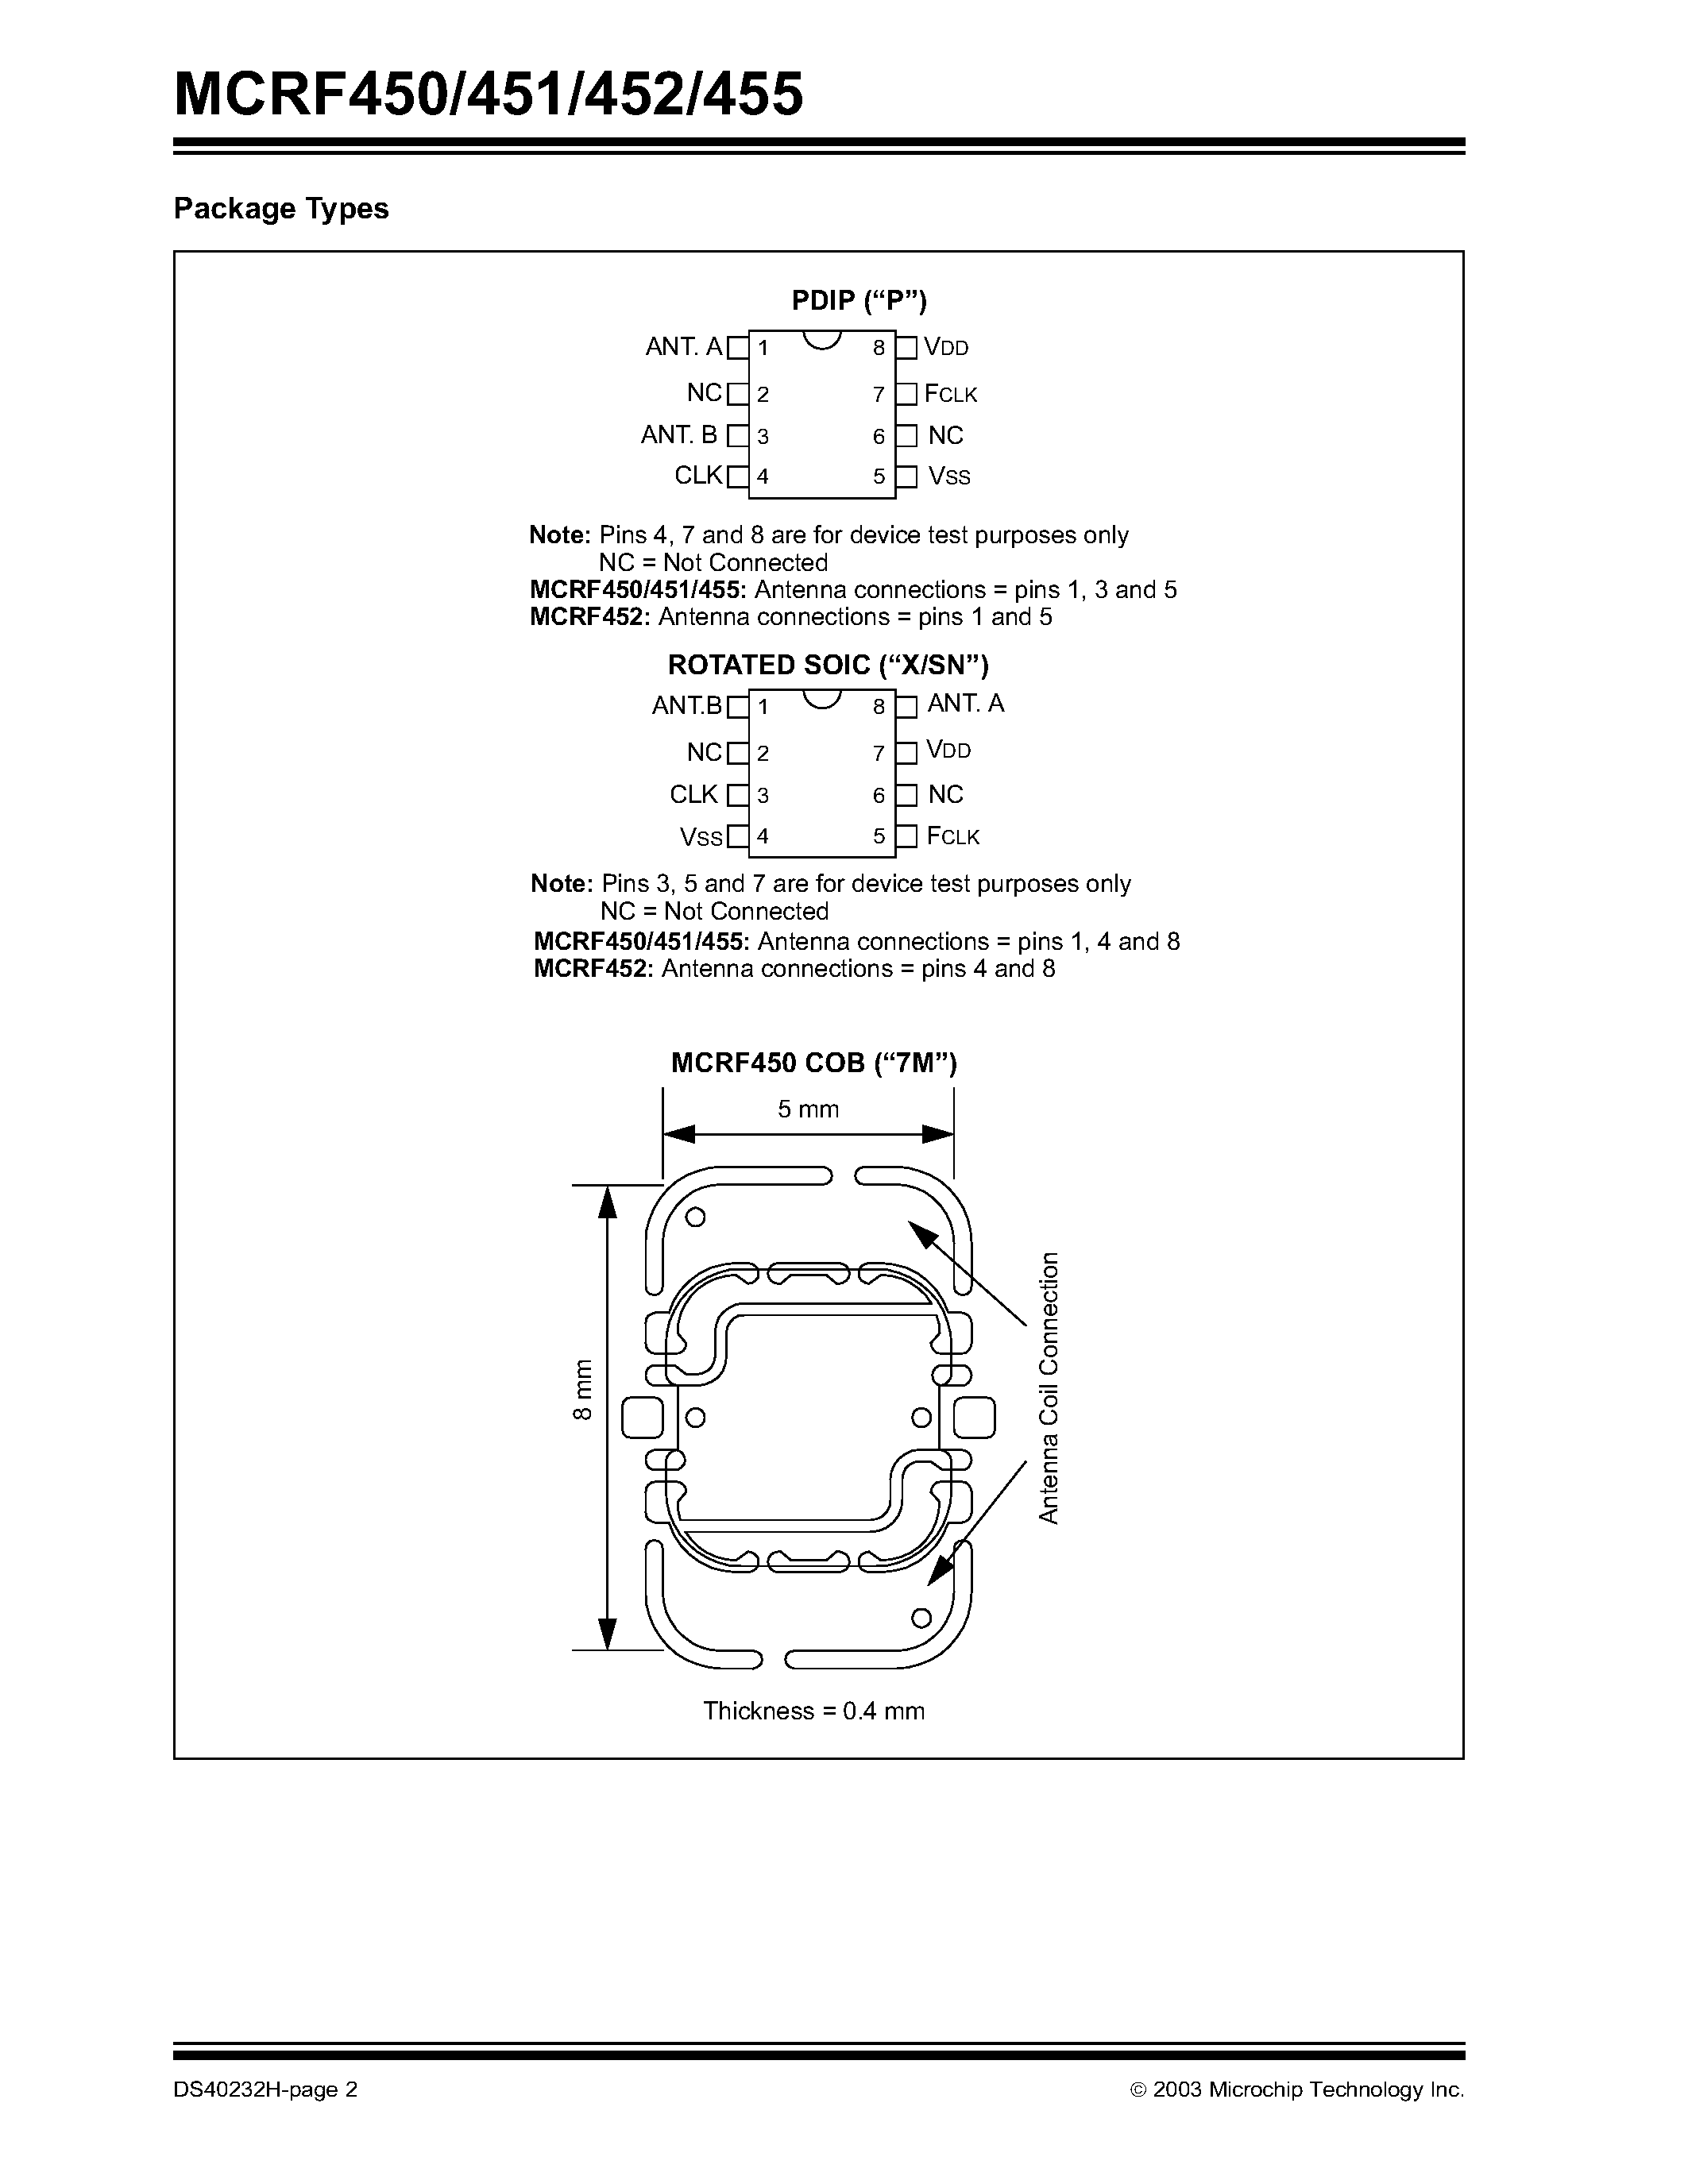 Datasheet MCRF450 - 13.56 MHz Read/Write Passive RFID Device page 2